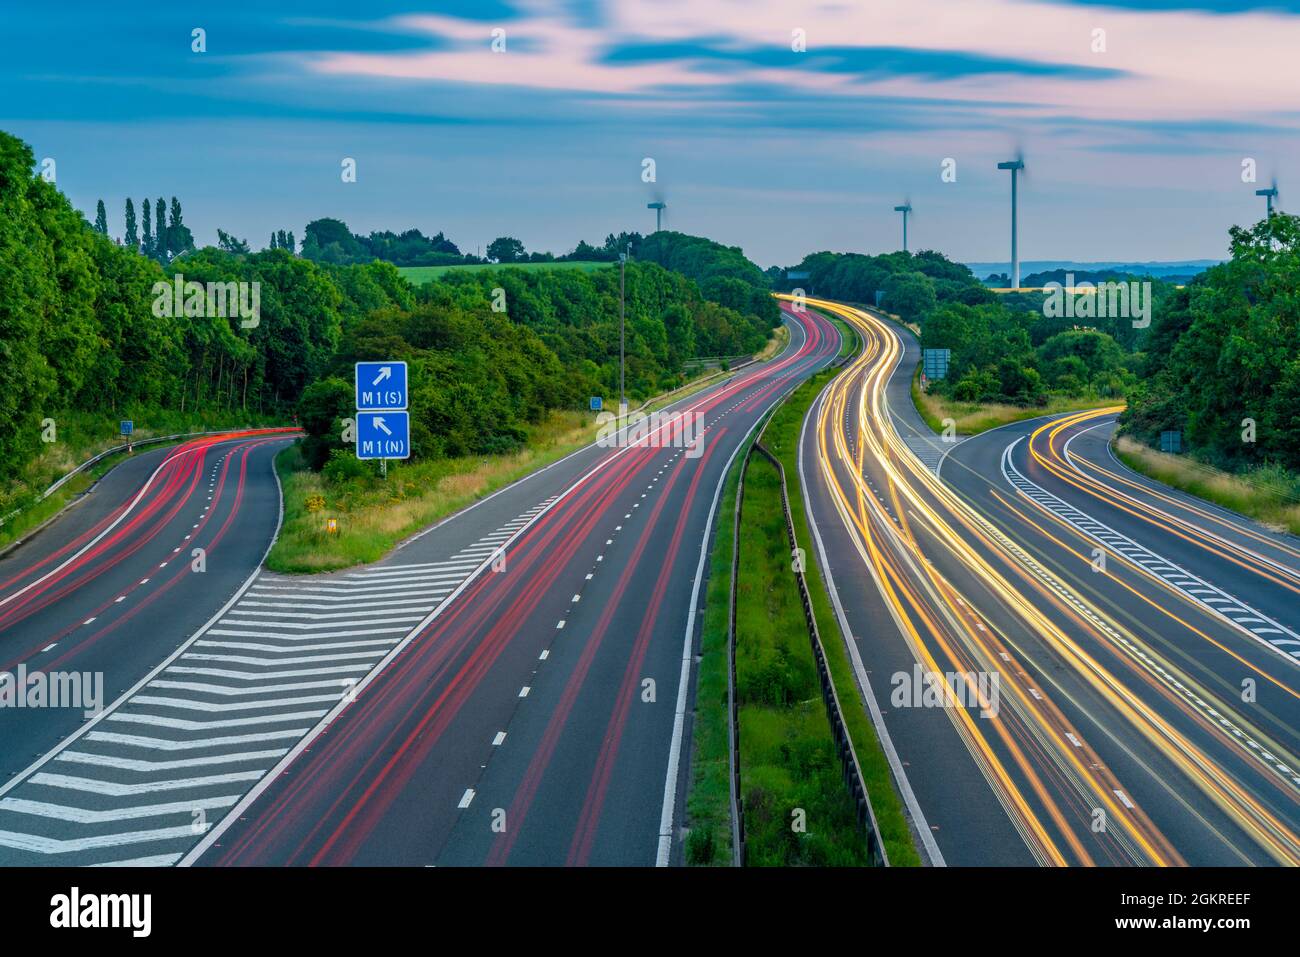 View of trail lights on the intersection of M1 and M18 Motorways at dusk in South Yorkshire, Sheffield, England, United Kingdom, Europe Stock Photo